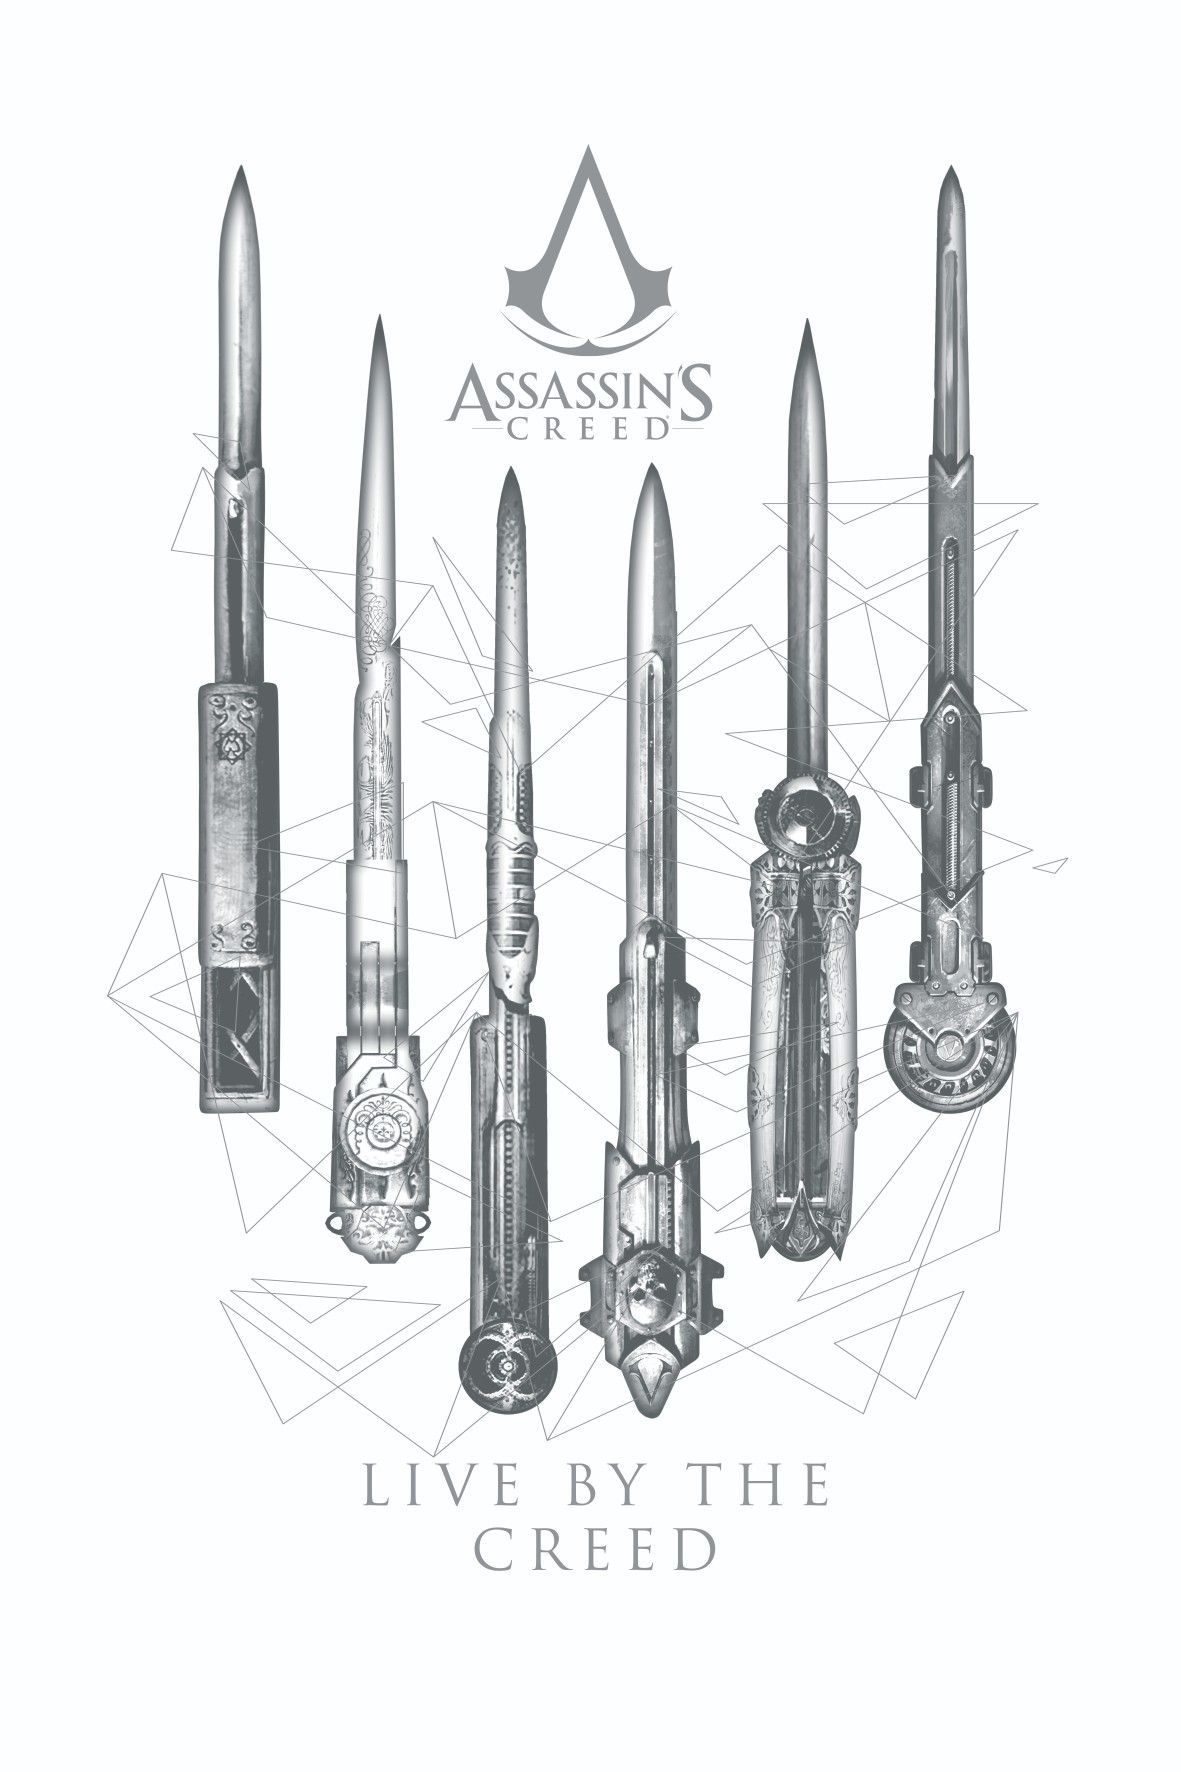 Live By The Creed. Assassins creed series, Assassin's creed wallpaper, Assassins creed art